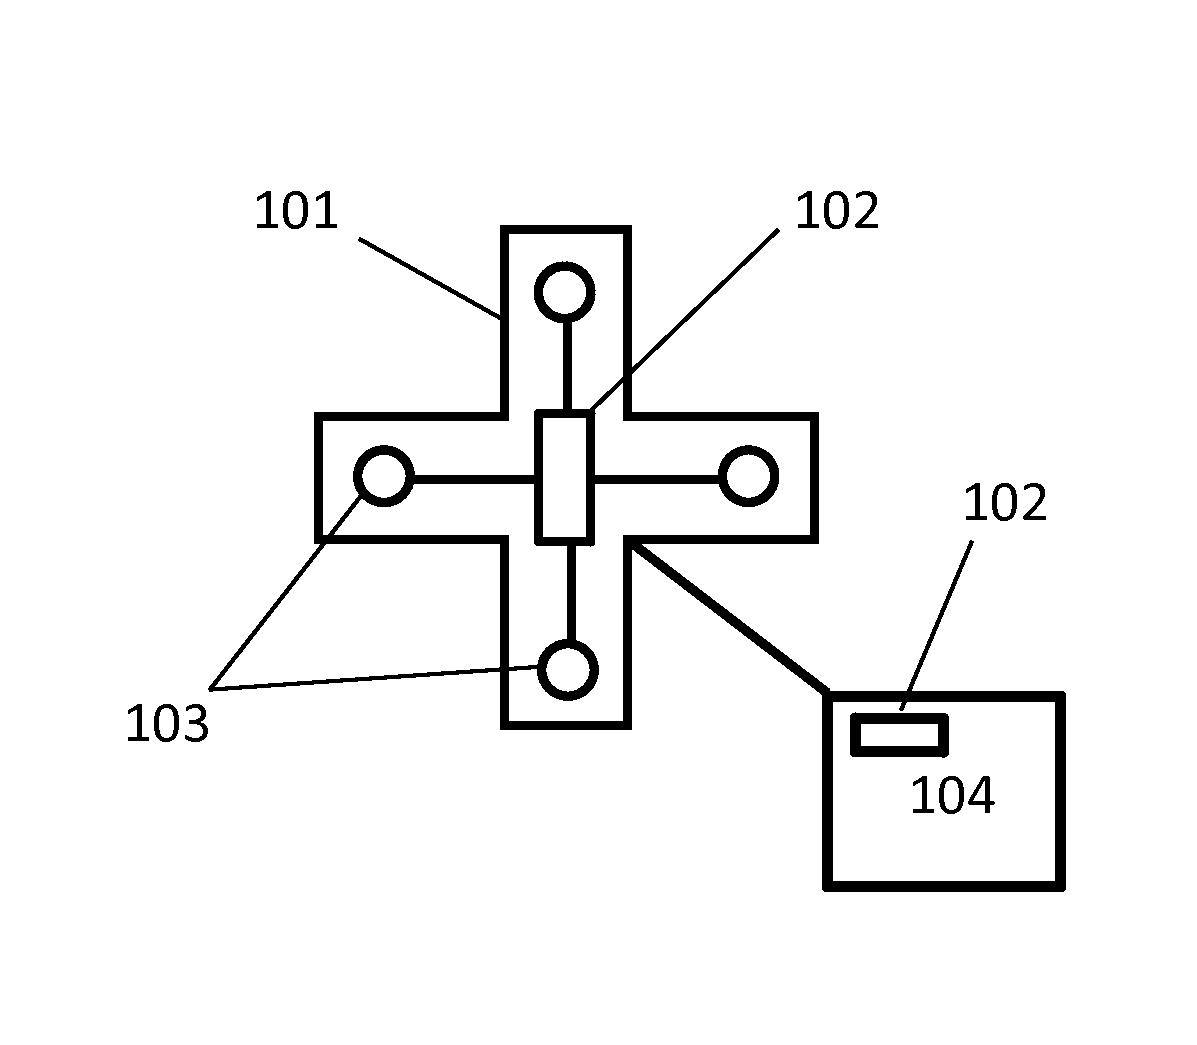 Visible light communication system for transmitting data between visual tracking systems and tracking markers